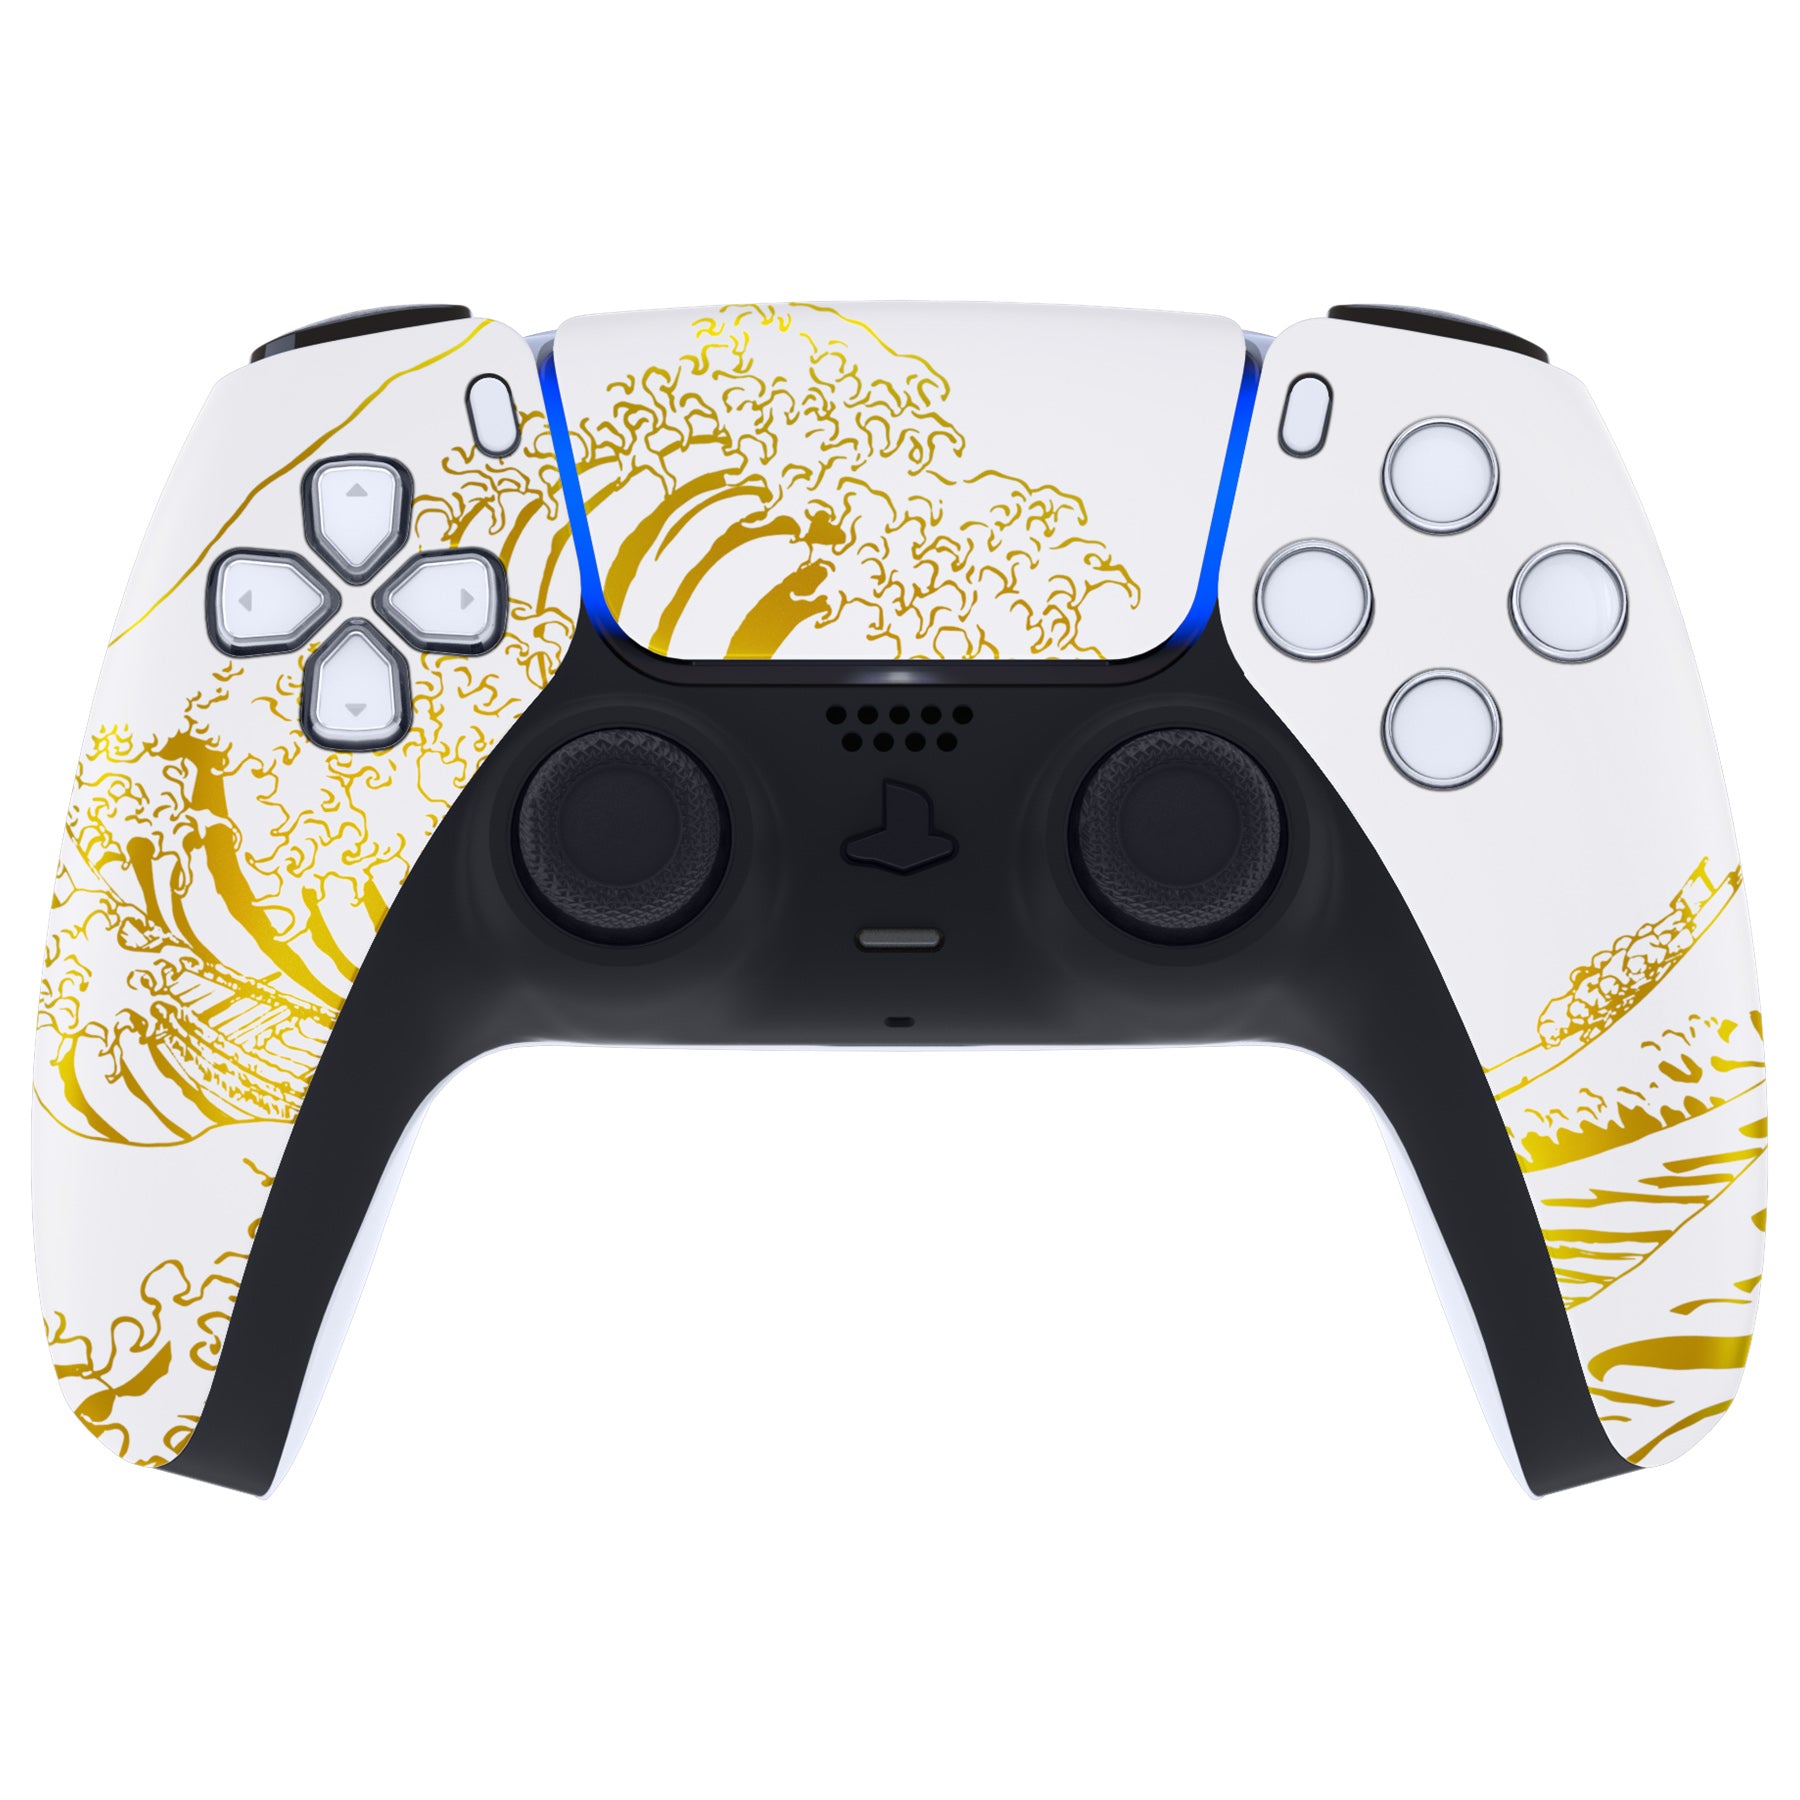 eXtremeRate Retail The Great GOLDEN Wave Off Kanagawa - White Front Housing Shell Compatible with ps5 Controller BDM-010 BDM-020 BDM-030, DIY Replacement Shell Custom Touch Pad Cover Compatible with ps5 Controller - ZPFT1095G3